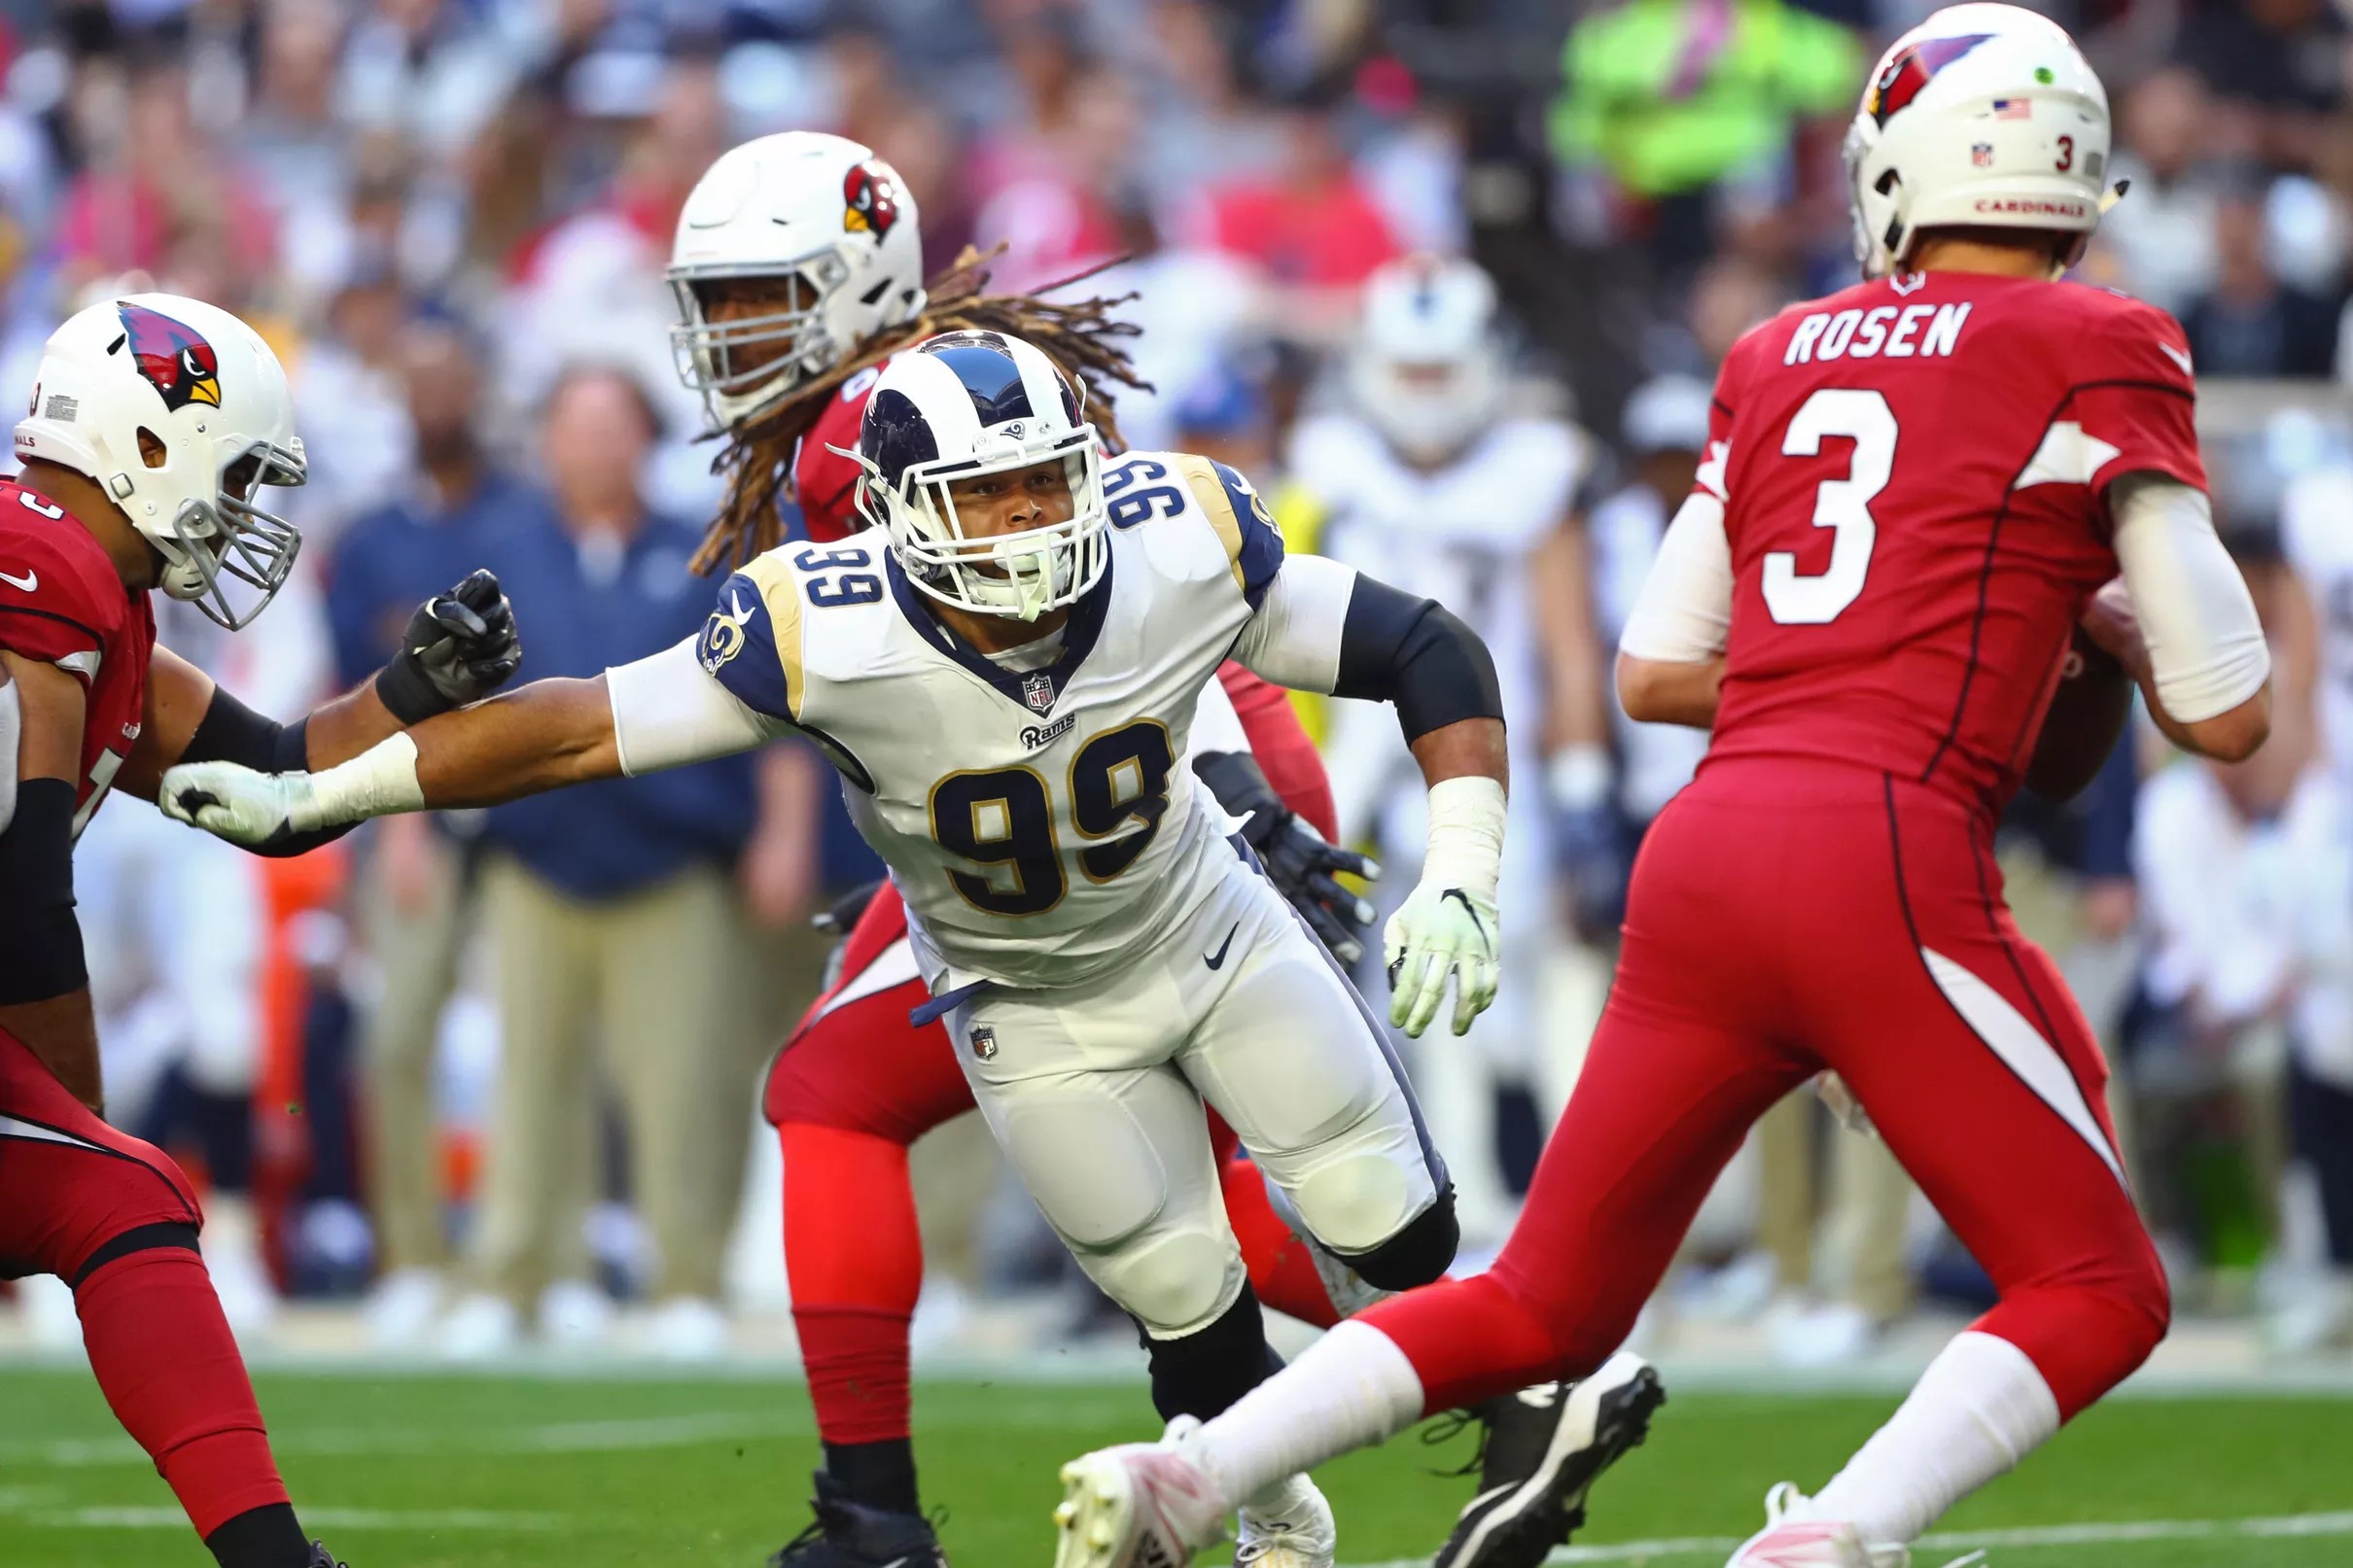 Aaron Donald sets NFL sack record for defensive tackles